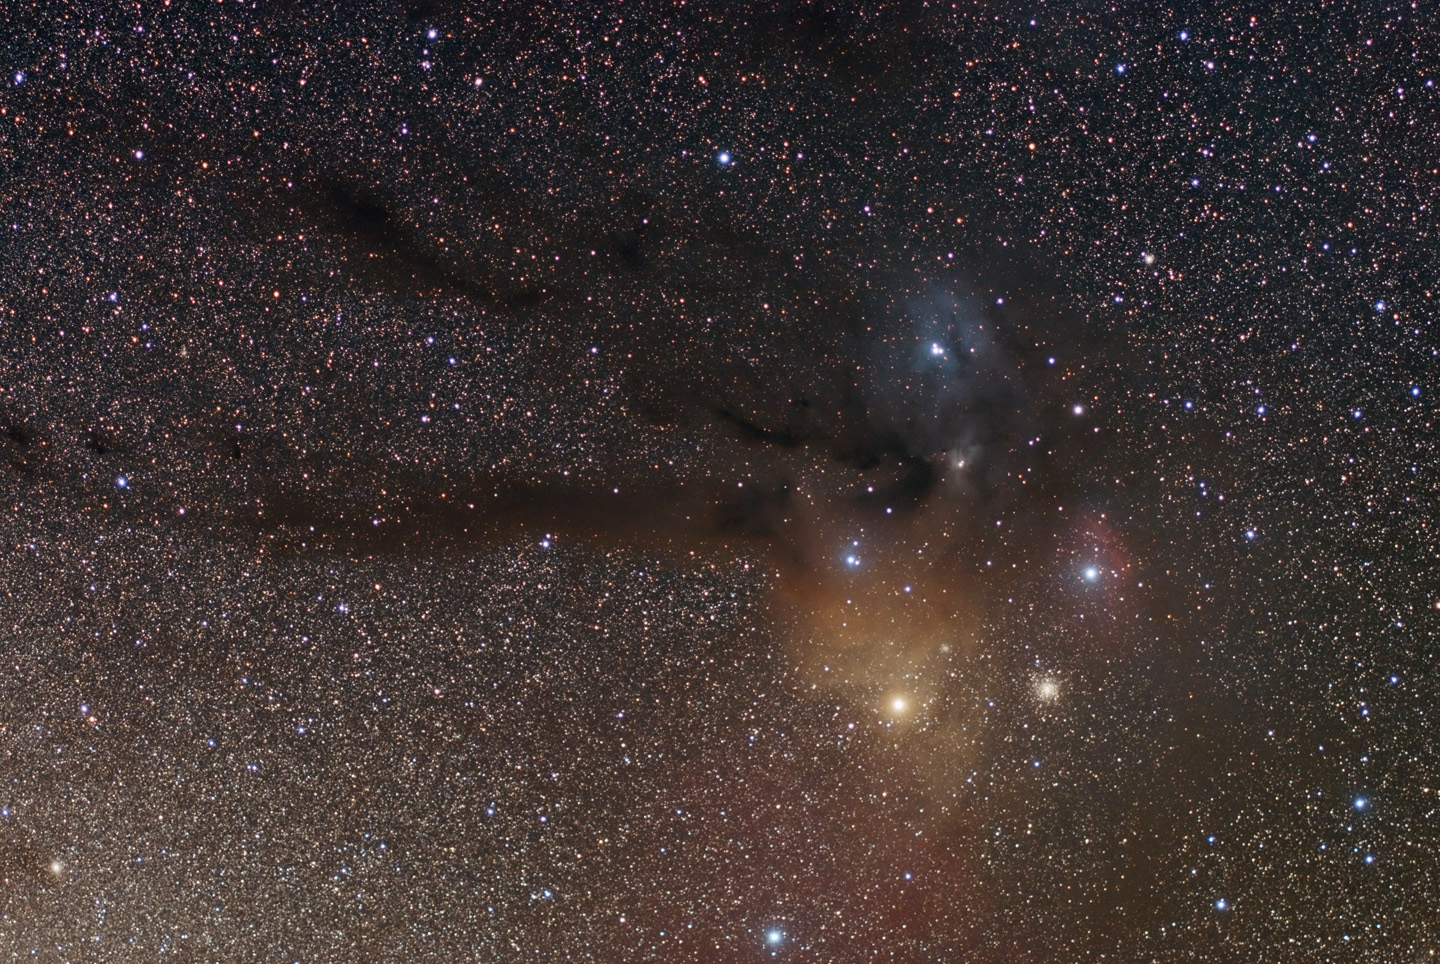 Photograph of Rho Ophiuchi / Antares